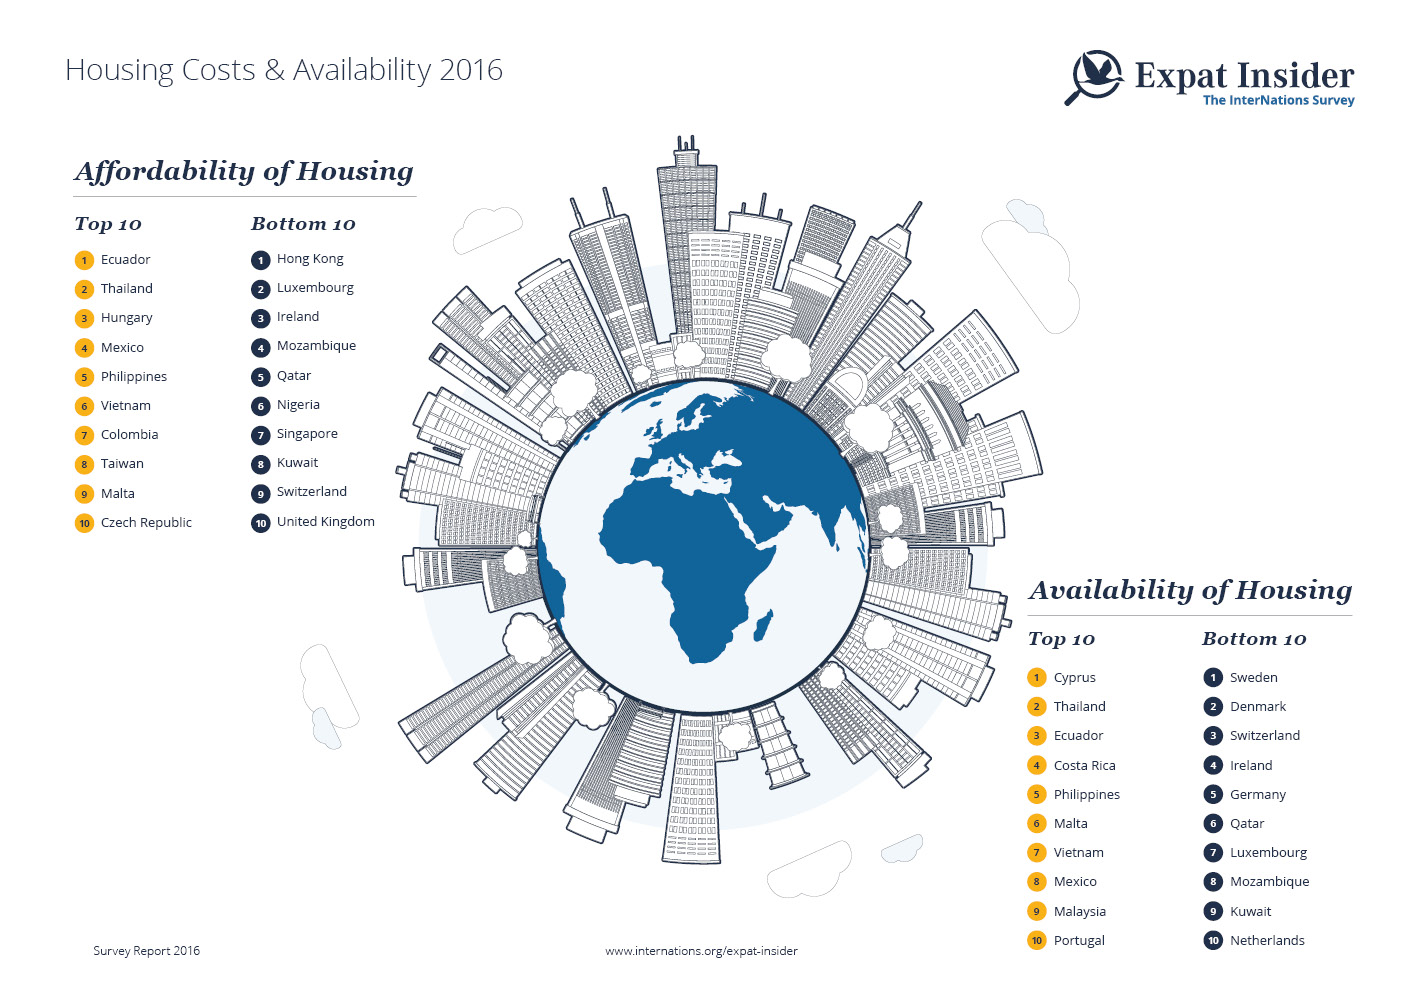 Affordability and Availability of Expat Housing 2016 — infographic